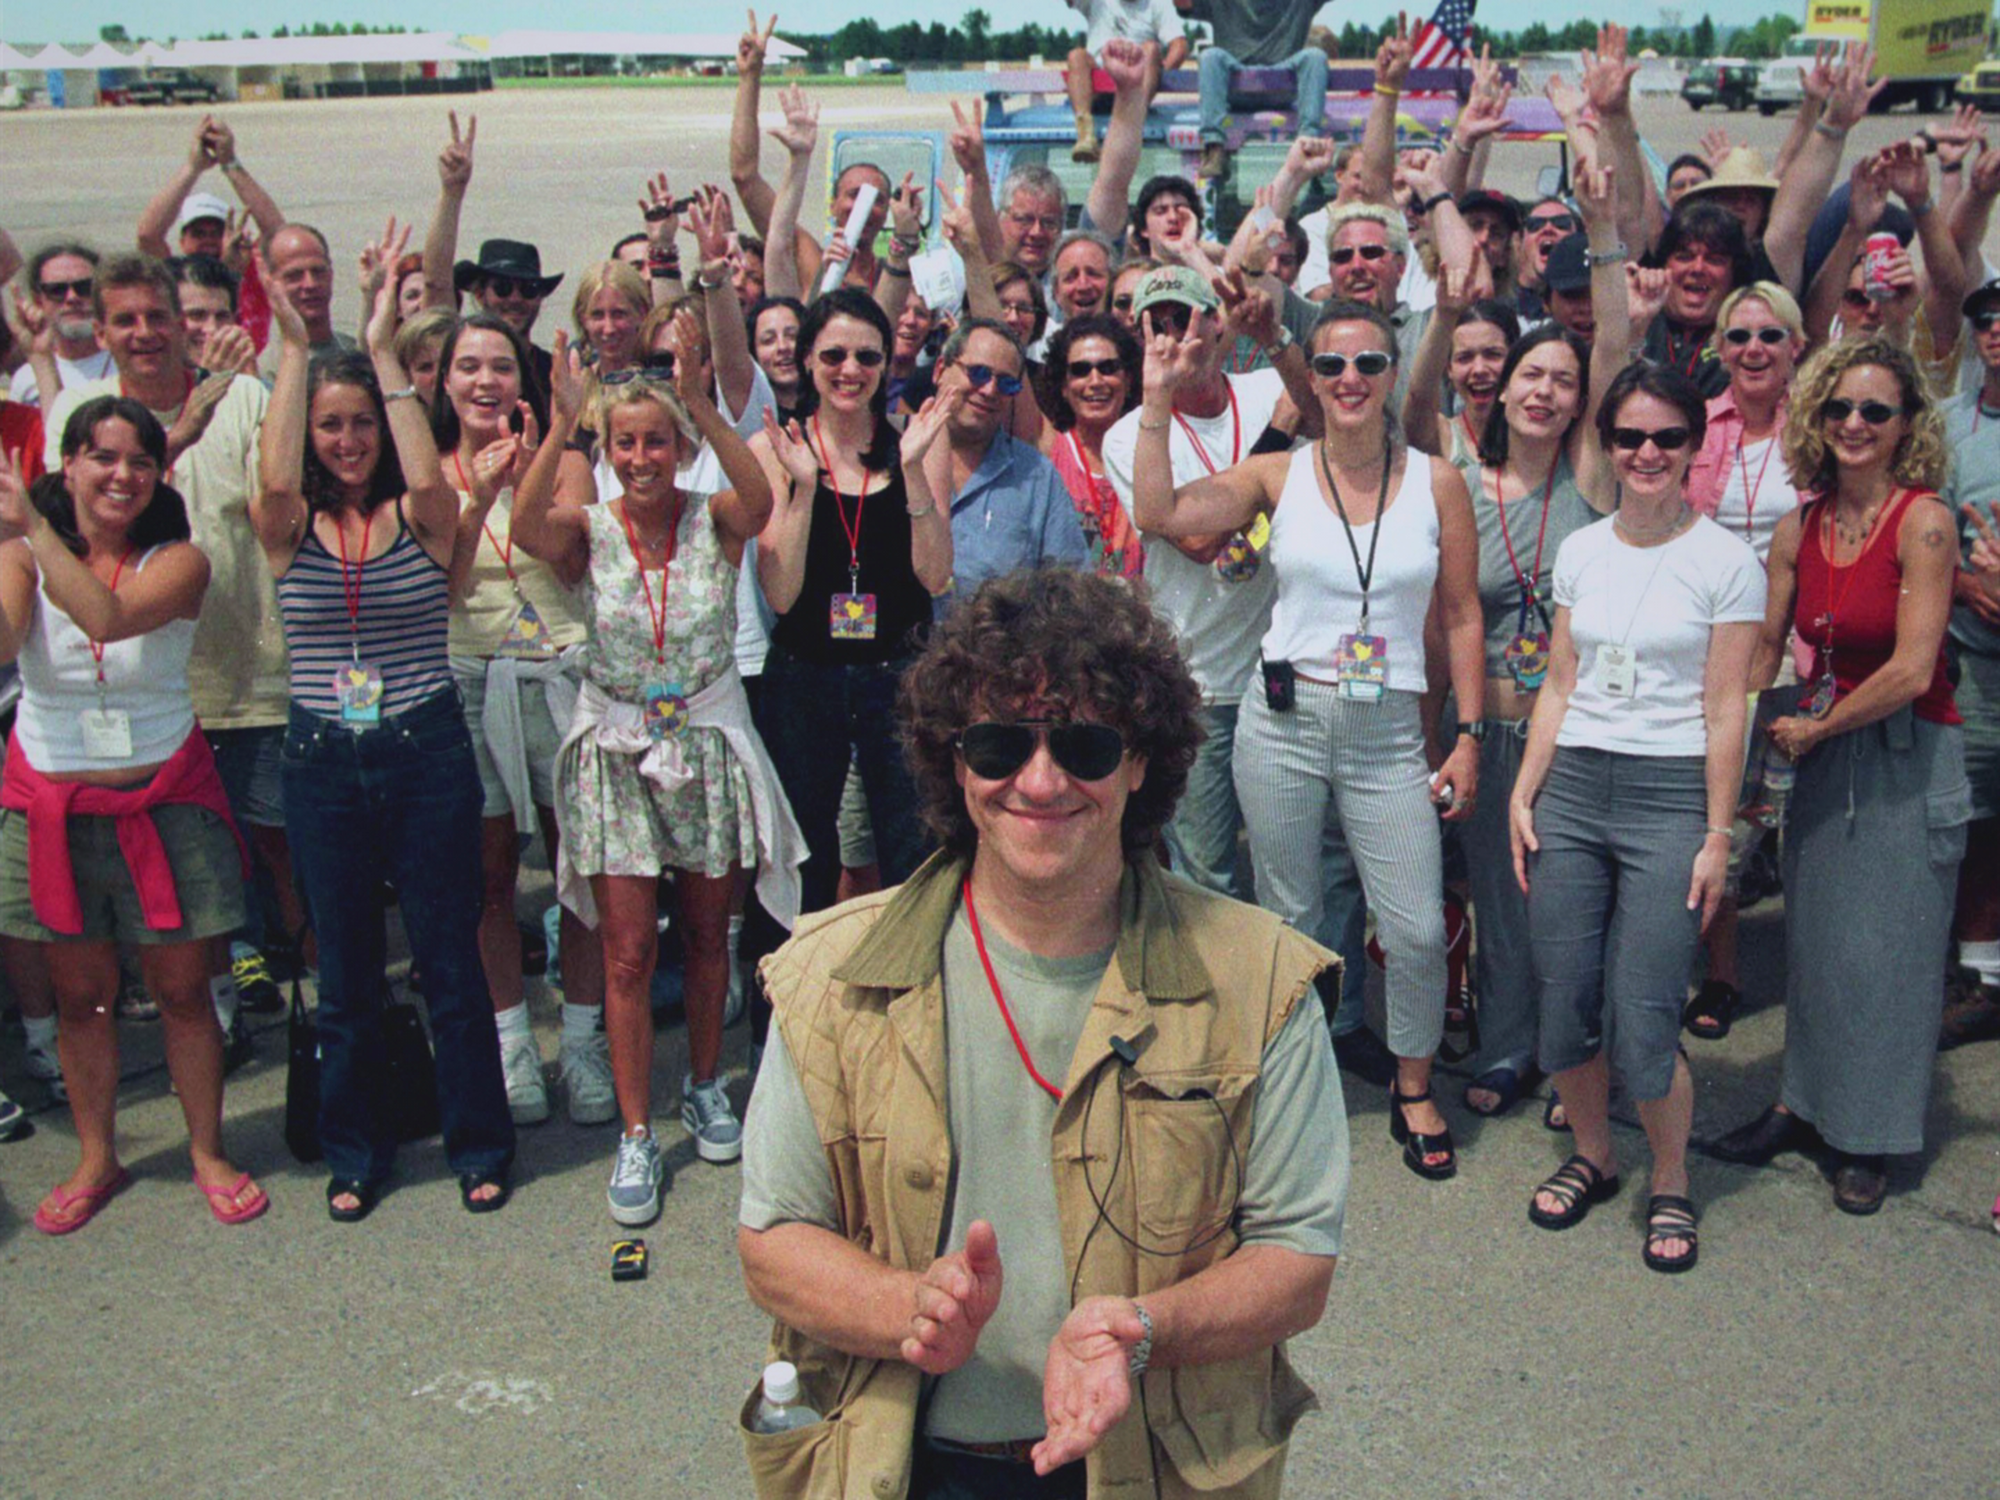 'Trainwreck: Woodstock '99' features Michael Lang, seen here standing in front of a crowd of people.